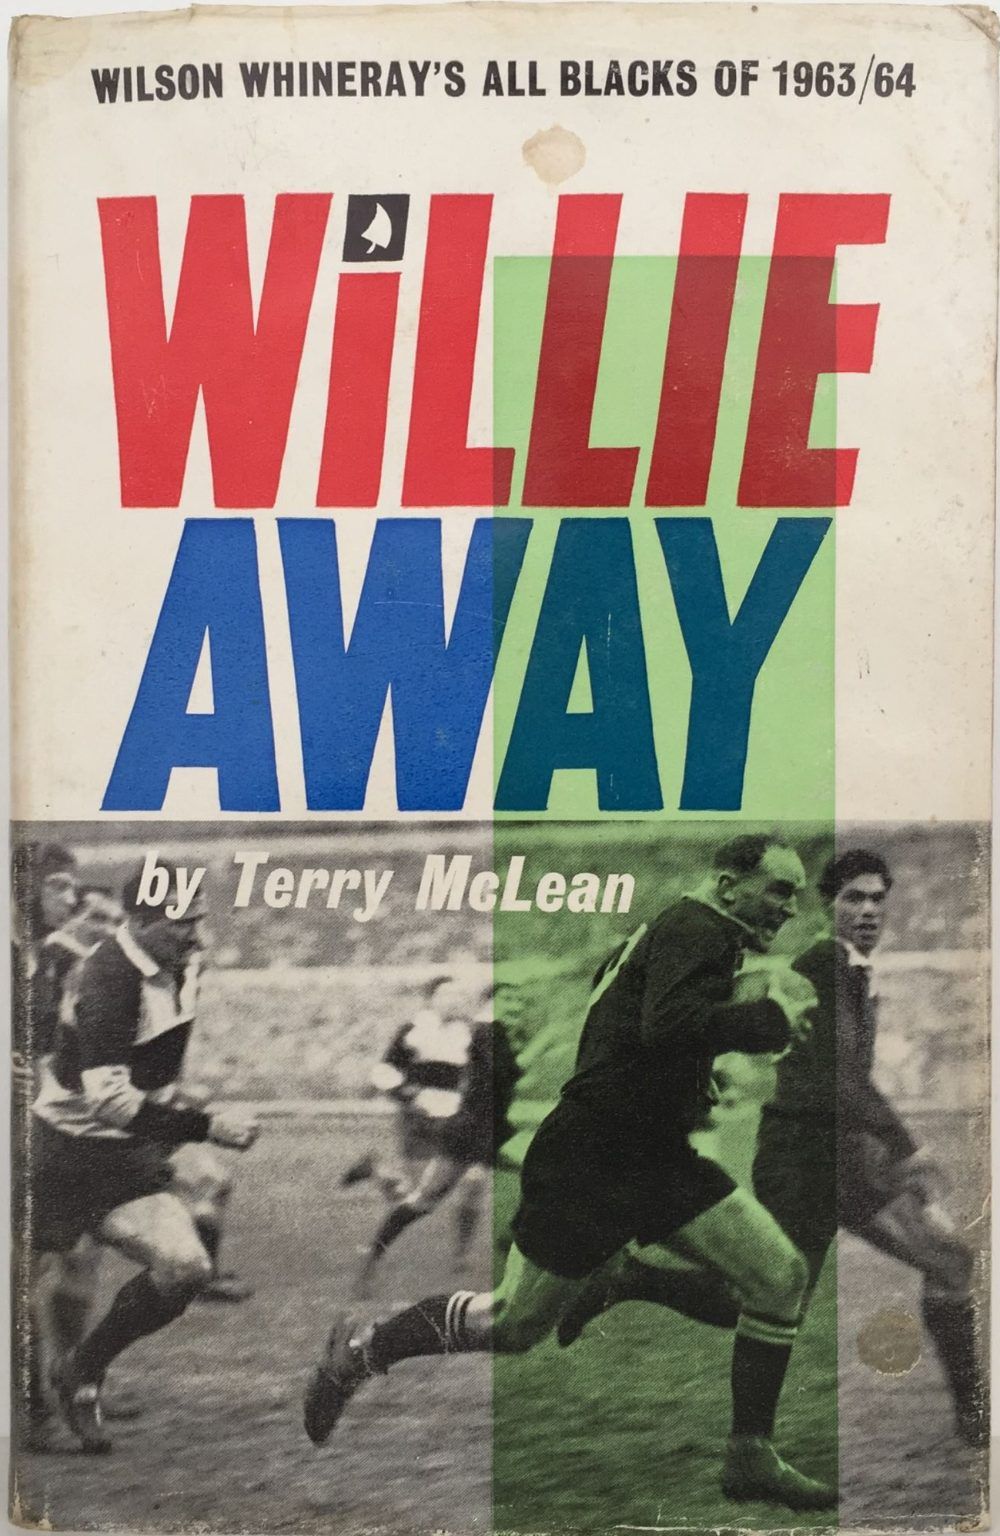 WILLIE AWAY: Wilson Whineray's All Blacks of 1963/1964